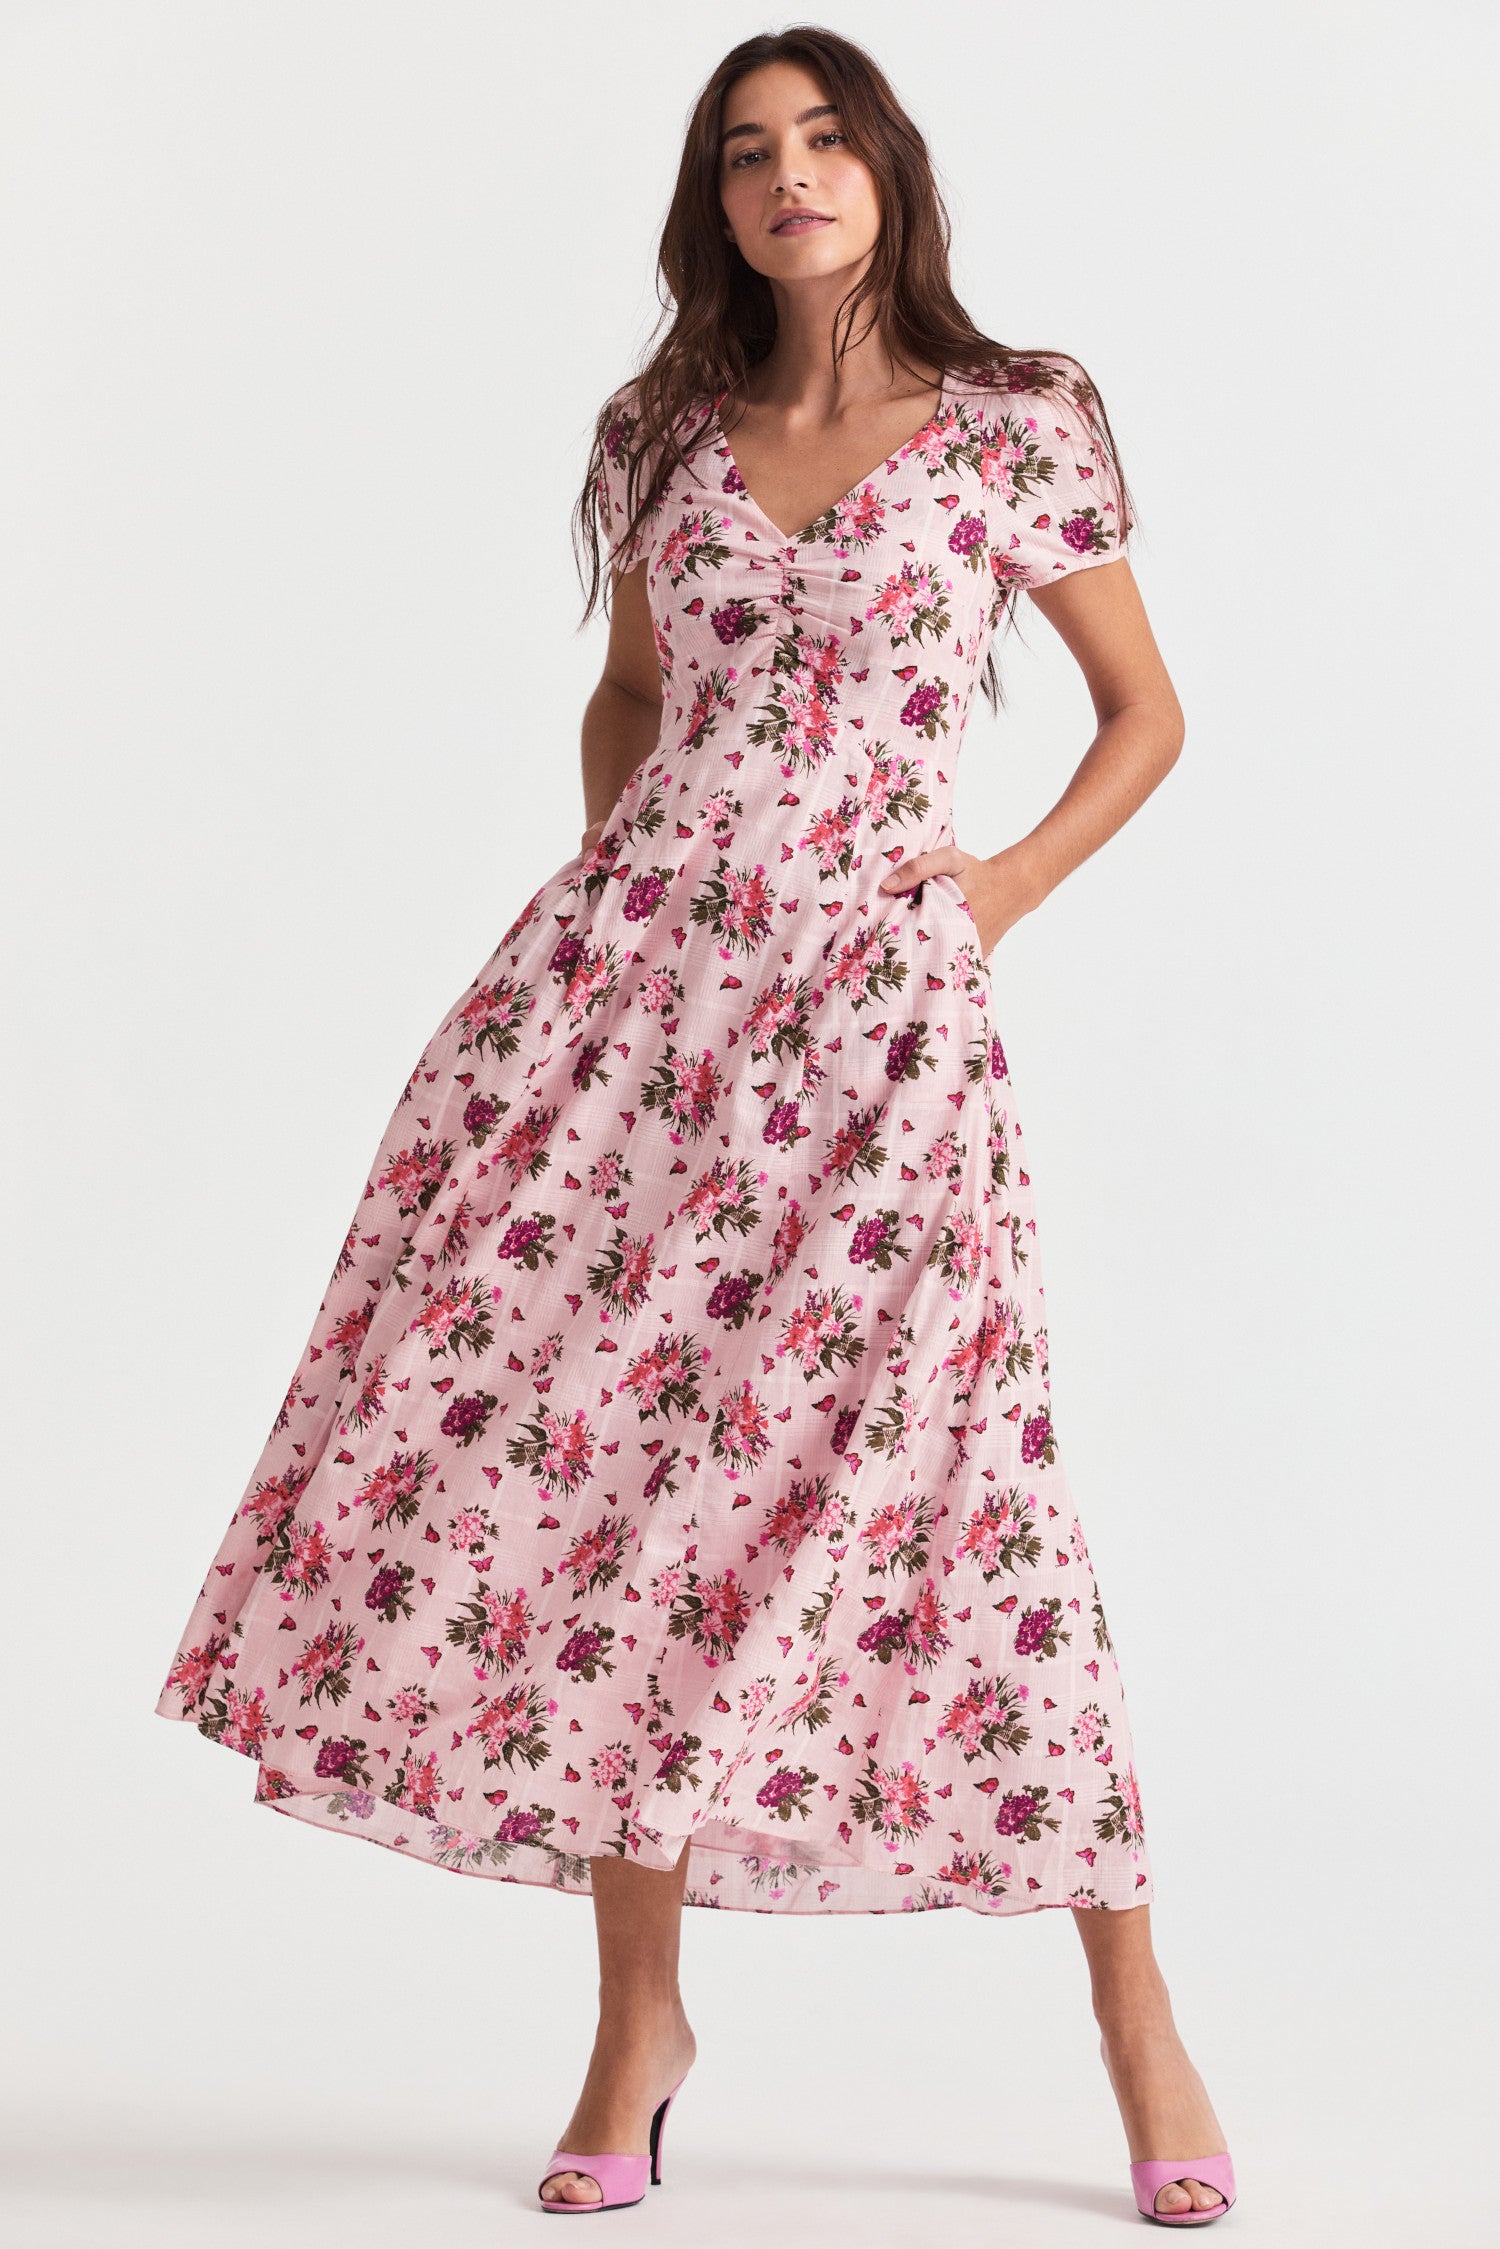  Pink floral maxi dress with shirred detailing sits around a square v-neck above a ruched center front. The dress falls to an easy swing skirt.